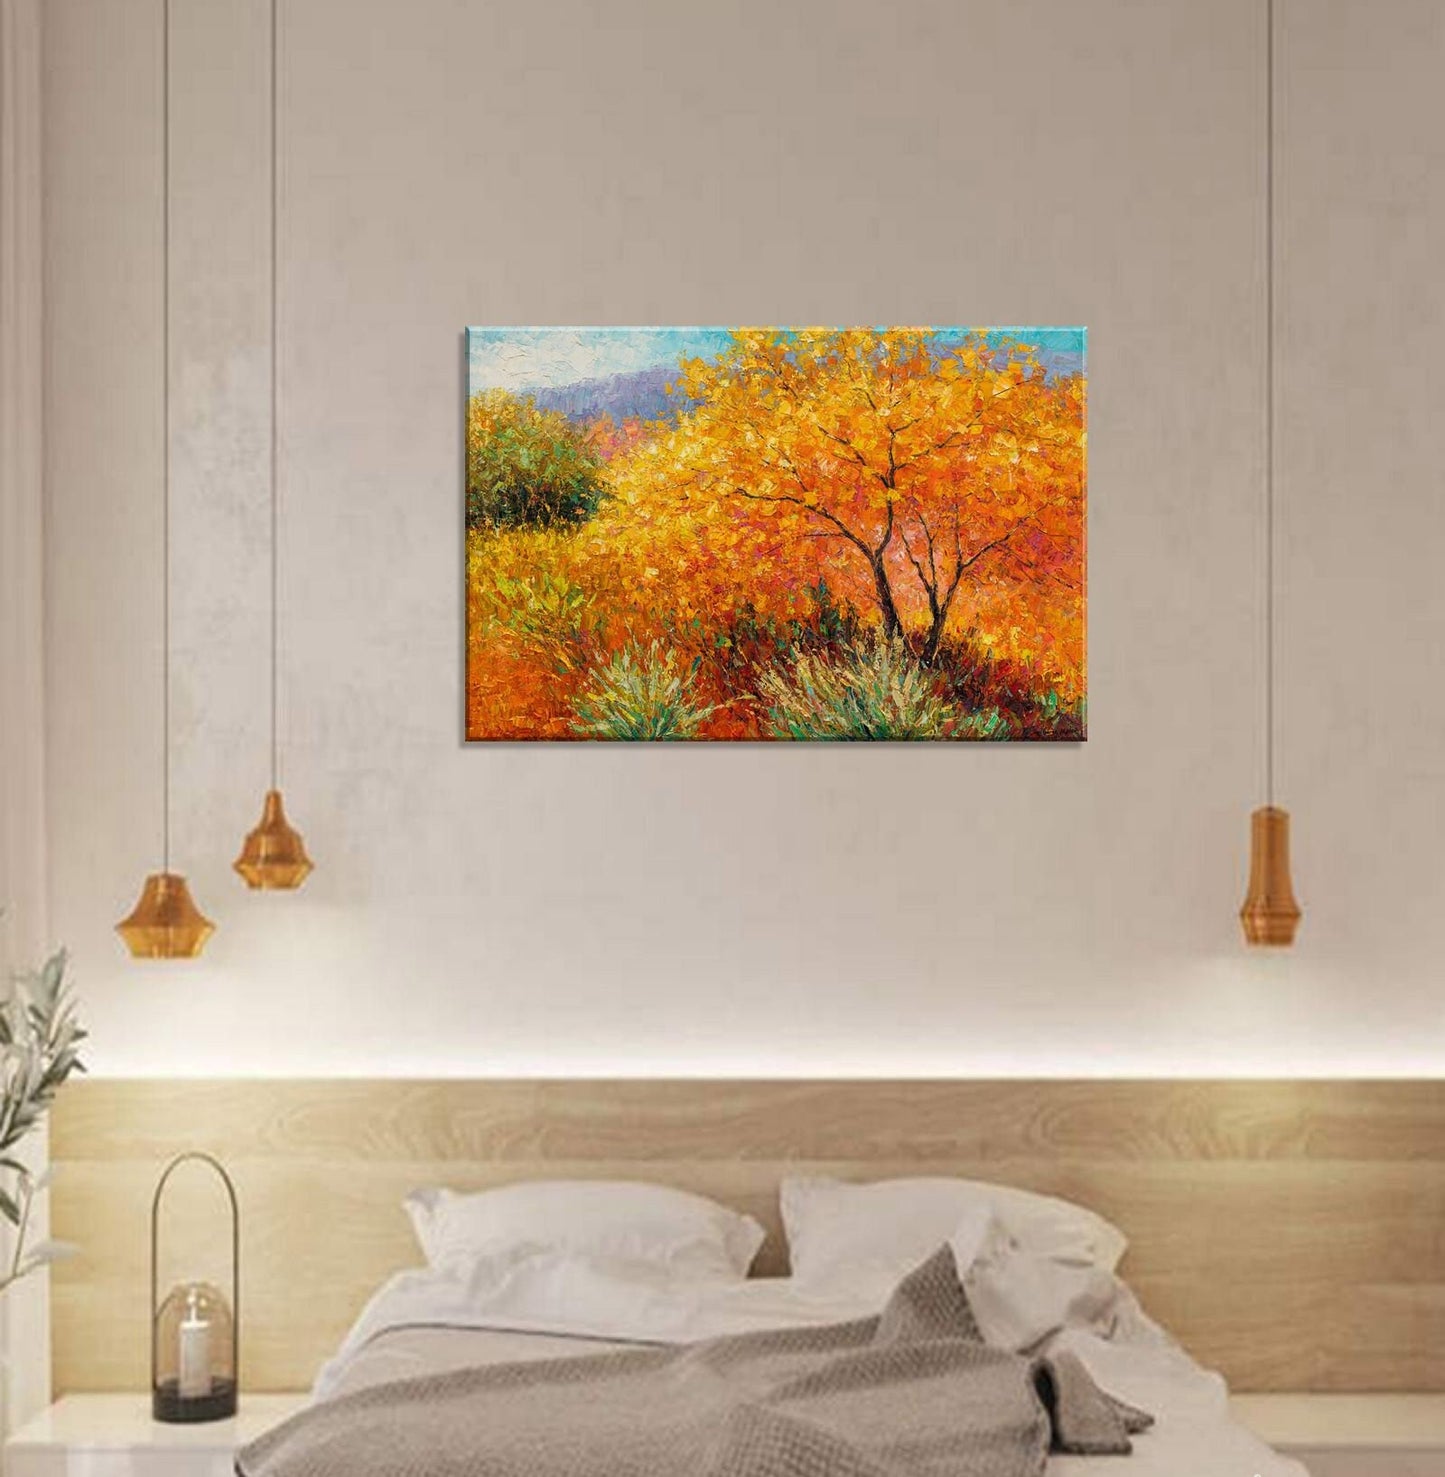 Oil Painting Landscape, Autumn Forest, Contemporary Painting, Original Artwork, Large Canvas Painting, Modern Wall Art, GeorgeMillerArt